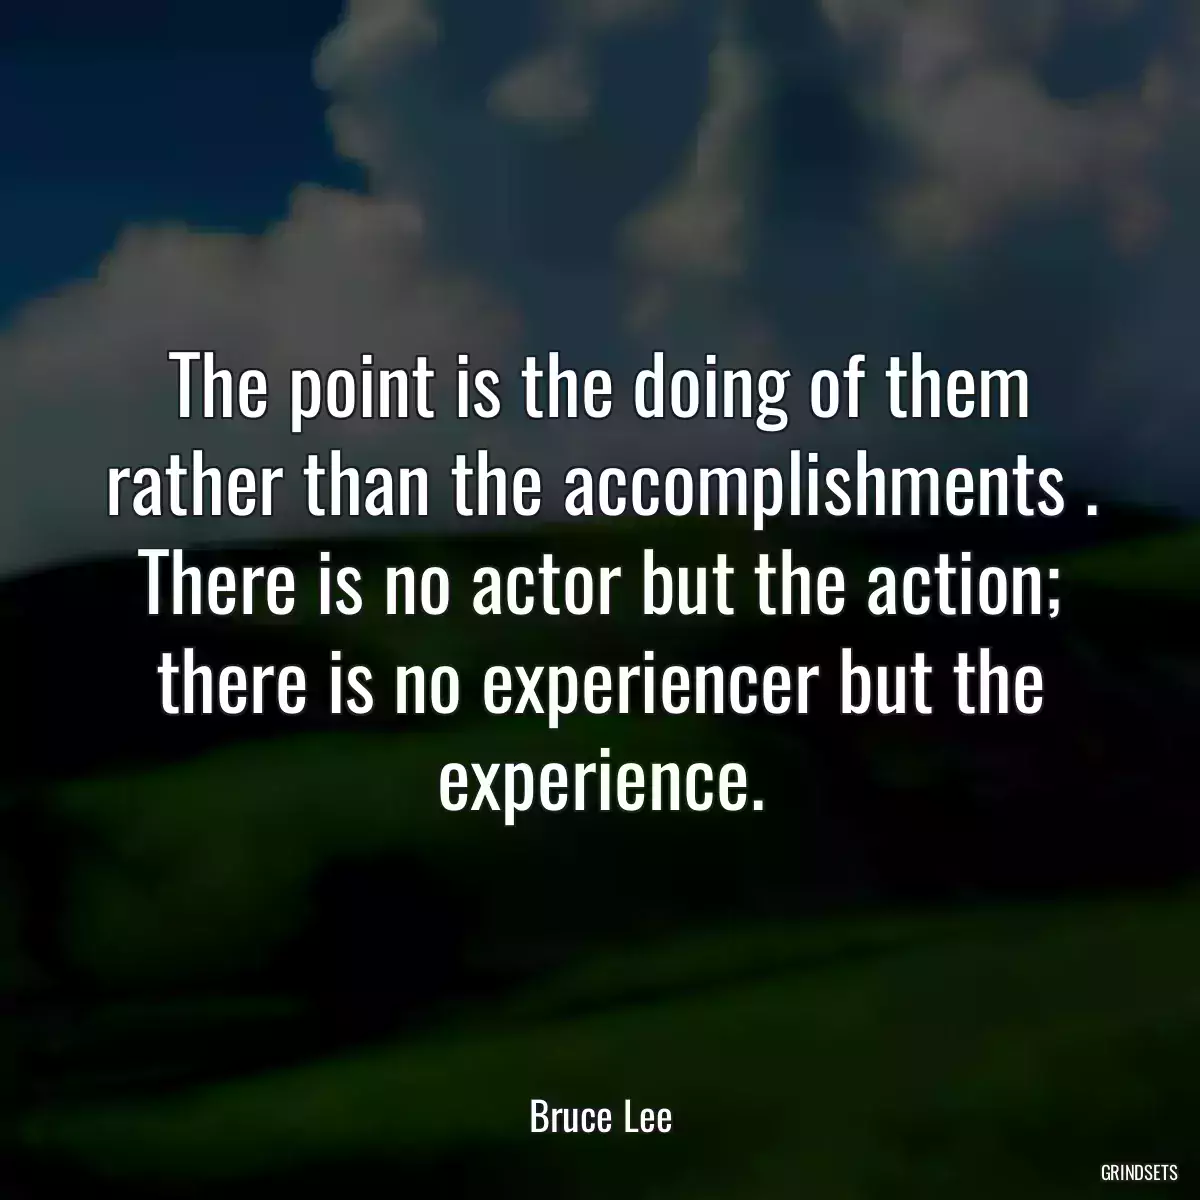 The point is the doing of them rather than the accomplishments . There is no actor but the action; there is no experiencer but the experience.